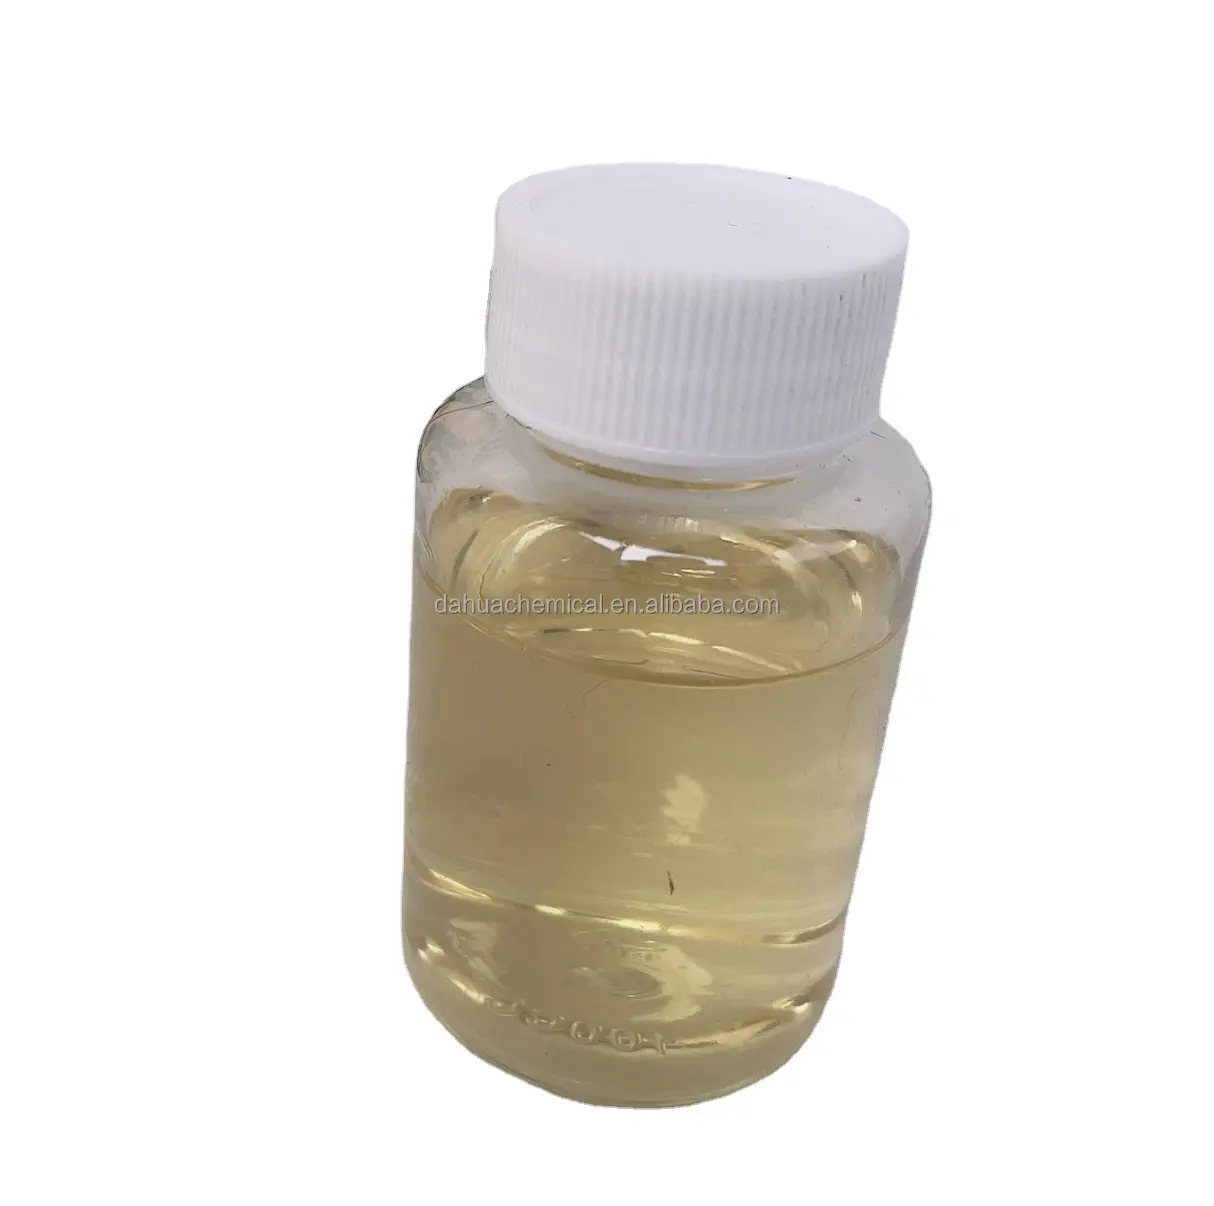 Cation liquid antistatic oil agent for polyester nylon polyester and other synthetic fiber to eliminate static through emulsion